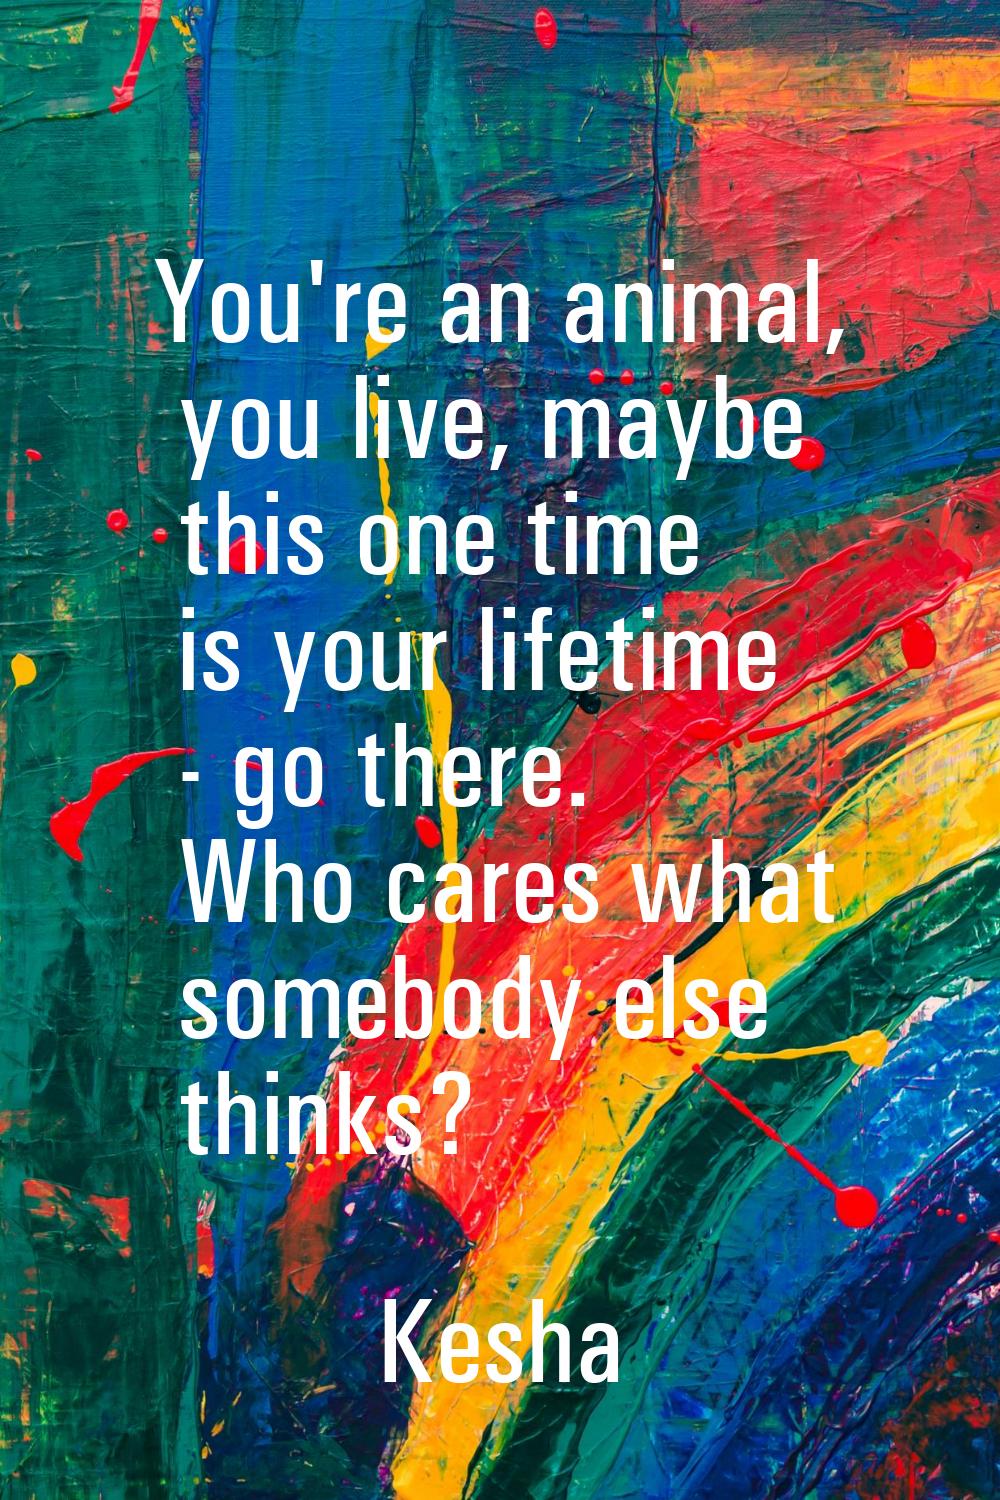 You're an animal, you live, maybe this one time is your lifetime - go there. Who cares what somebod